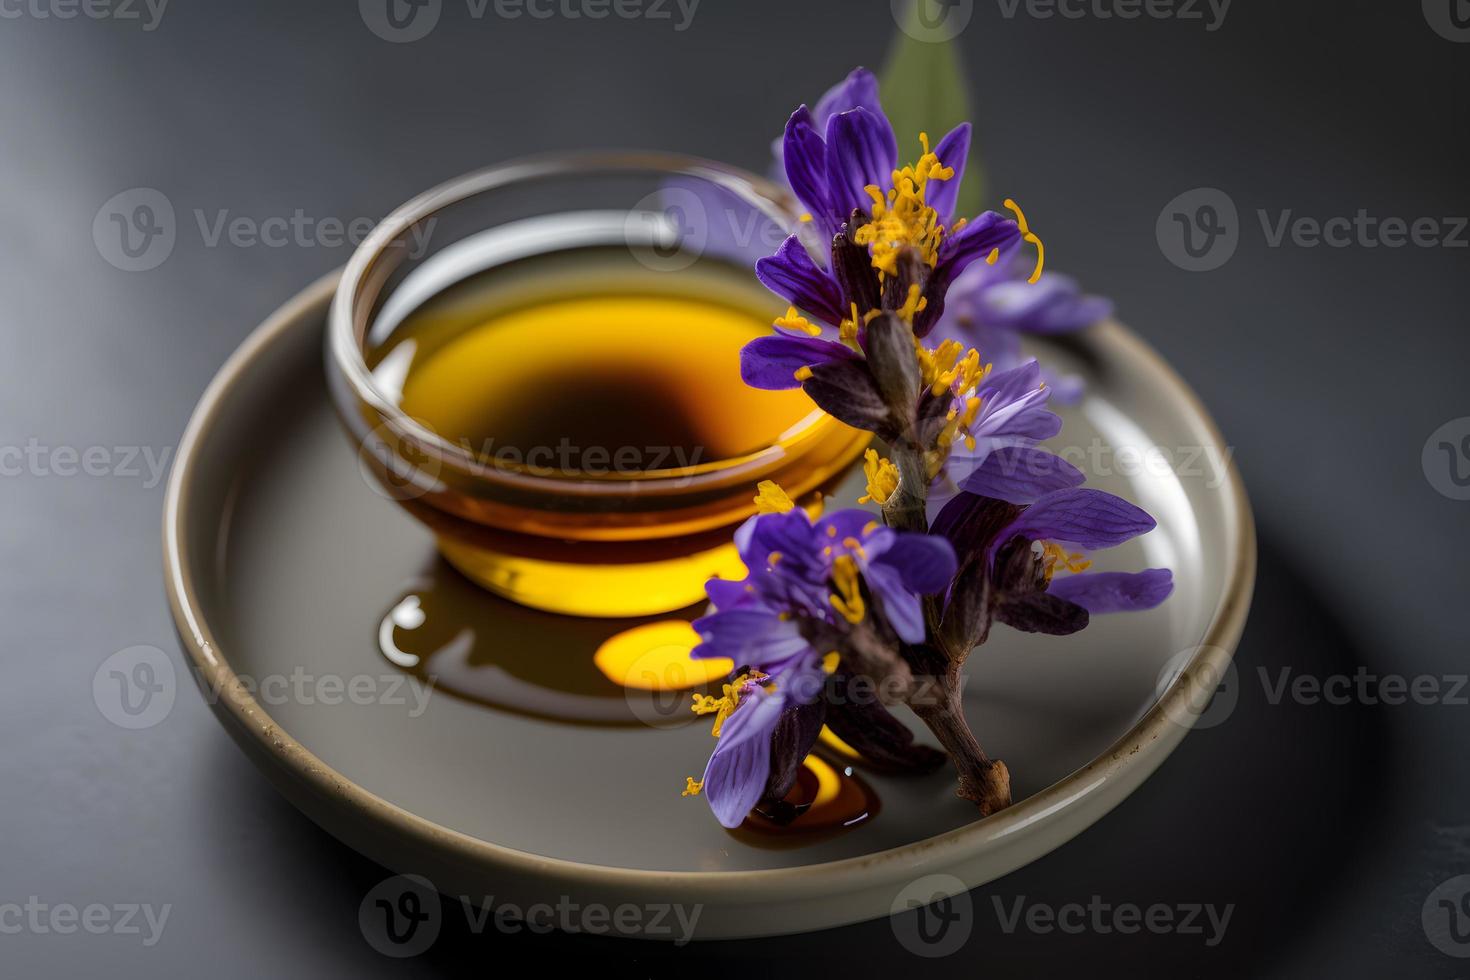 Homemade and tasty fried lilac flower in sunflower oil photography photo